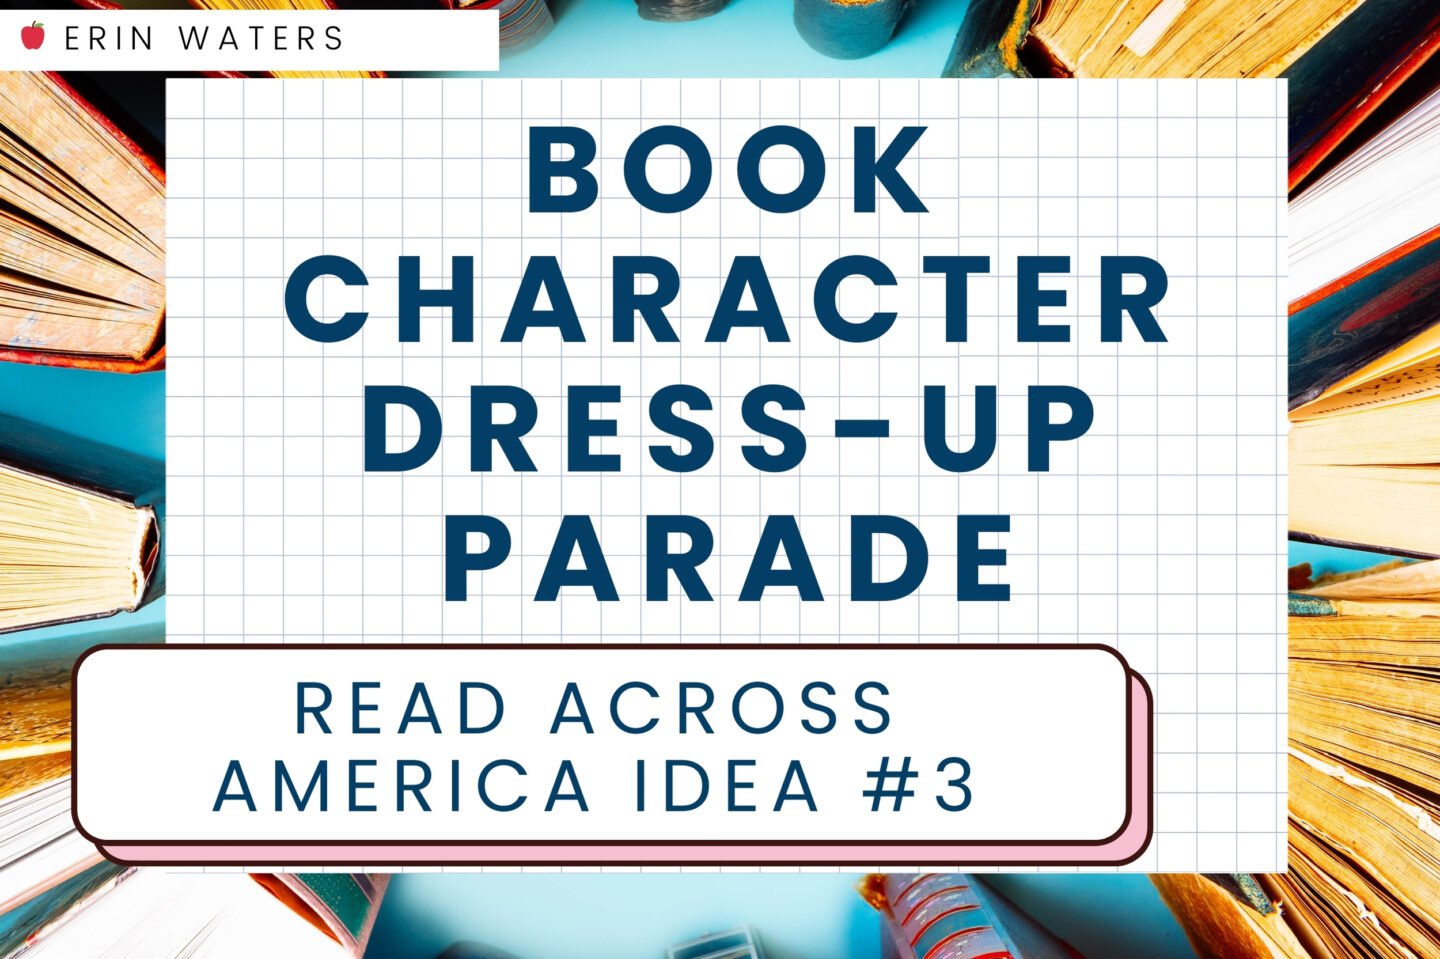 Read Across America activities idea#3: navy text that reads 'Book Character Dress-Up Parade' against a background of book pages.